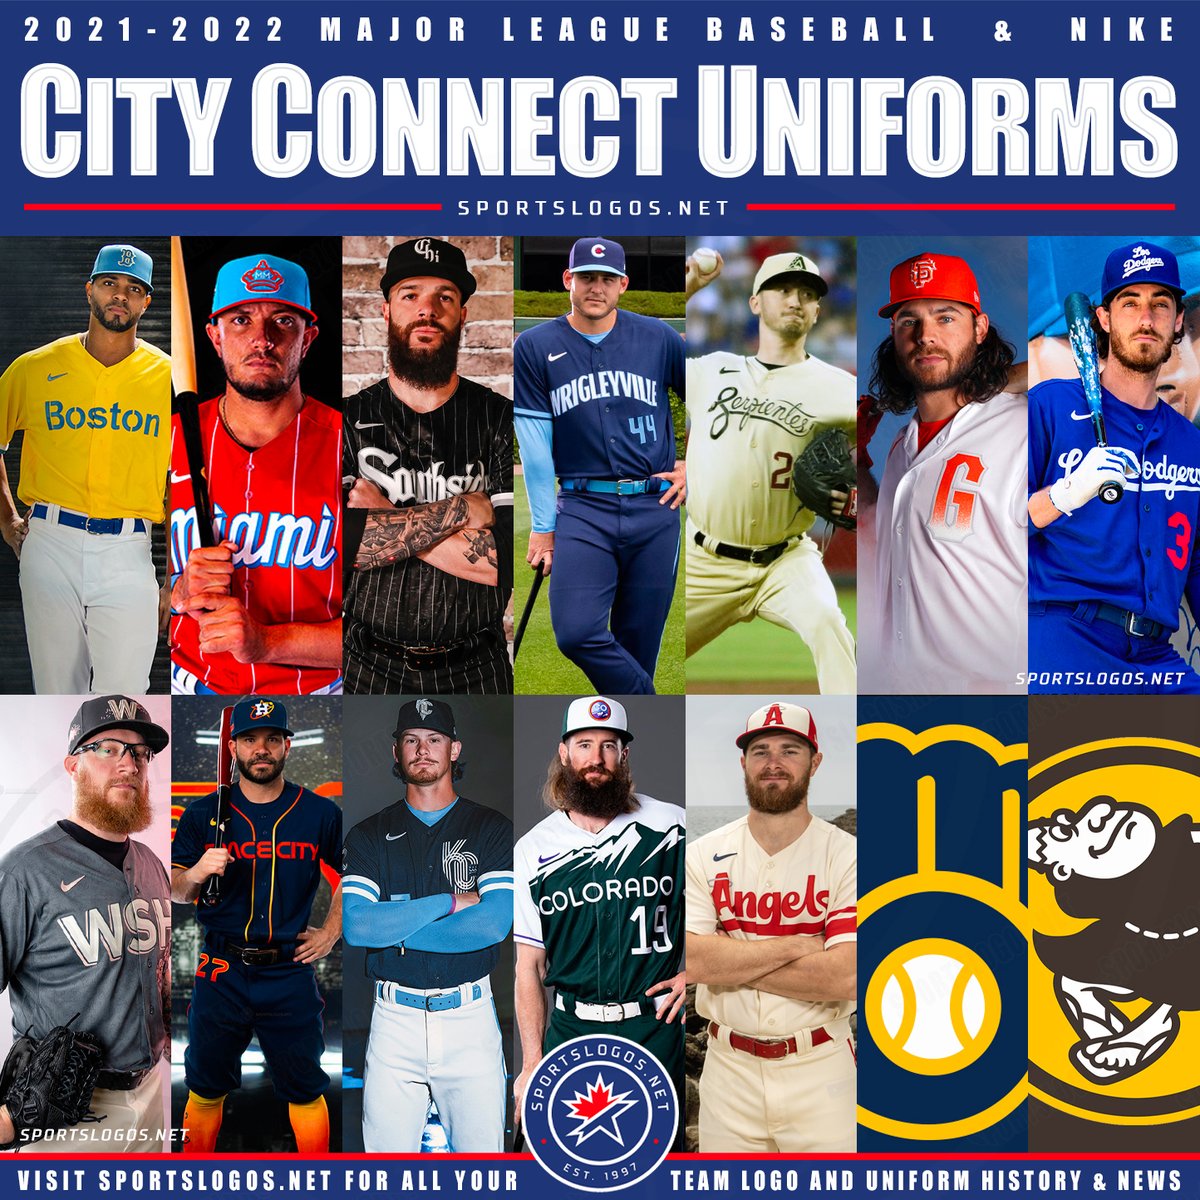 Chris Creamer  SportsLogos.Net on X: Here are the twelve City Connect  uniforms released so far. Two left in 2022 and a bunch more to come in  2023-24 #MLB #CityConnect #Nike  /